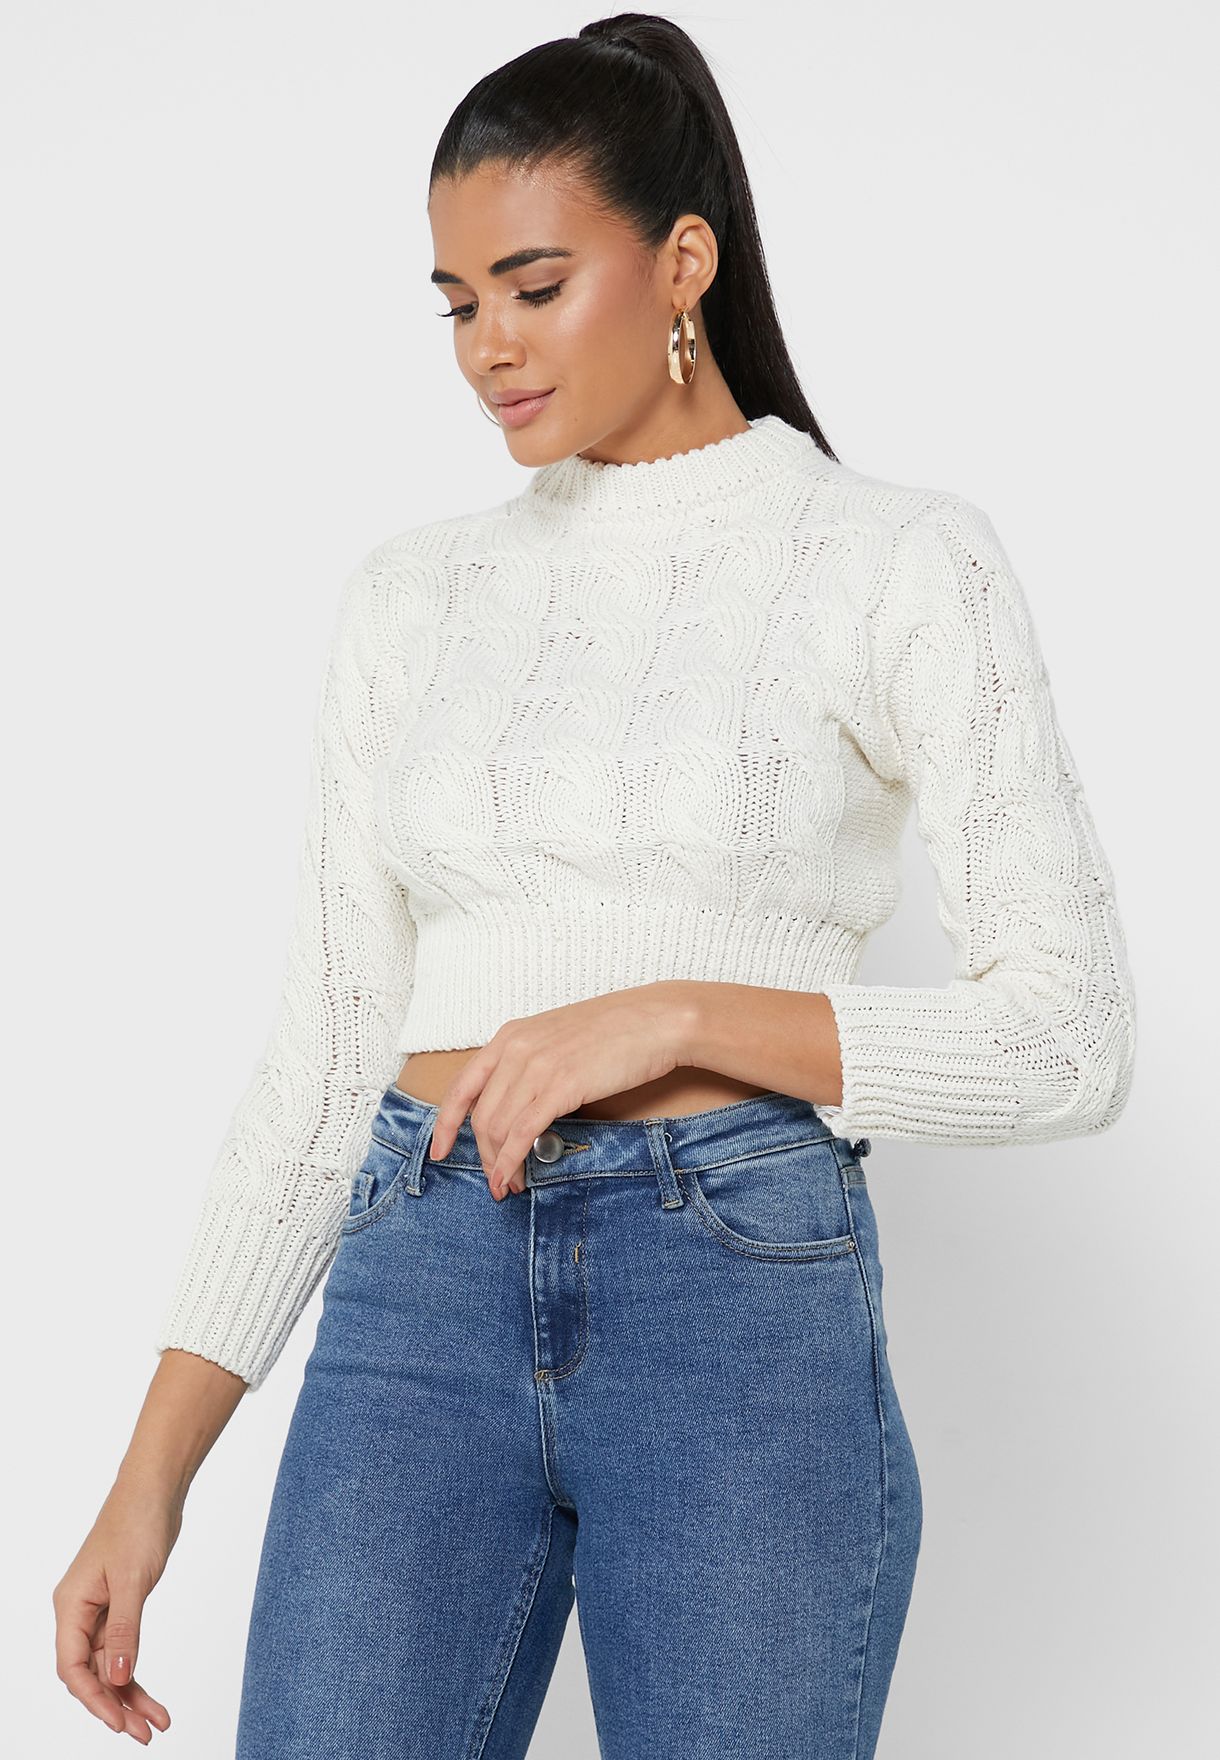 Braided Cropped Sweater